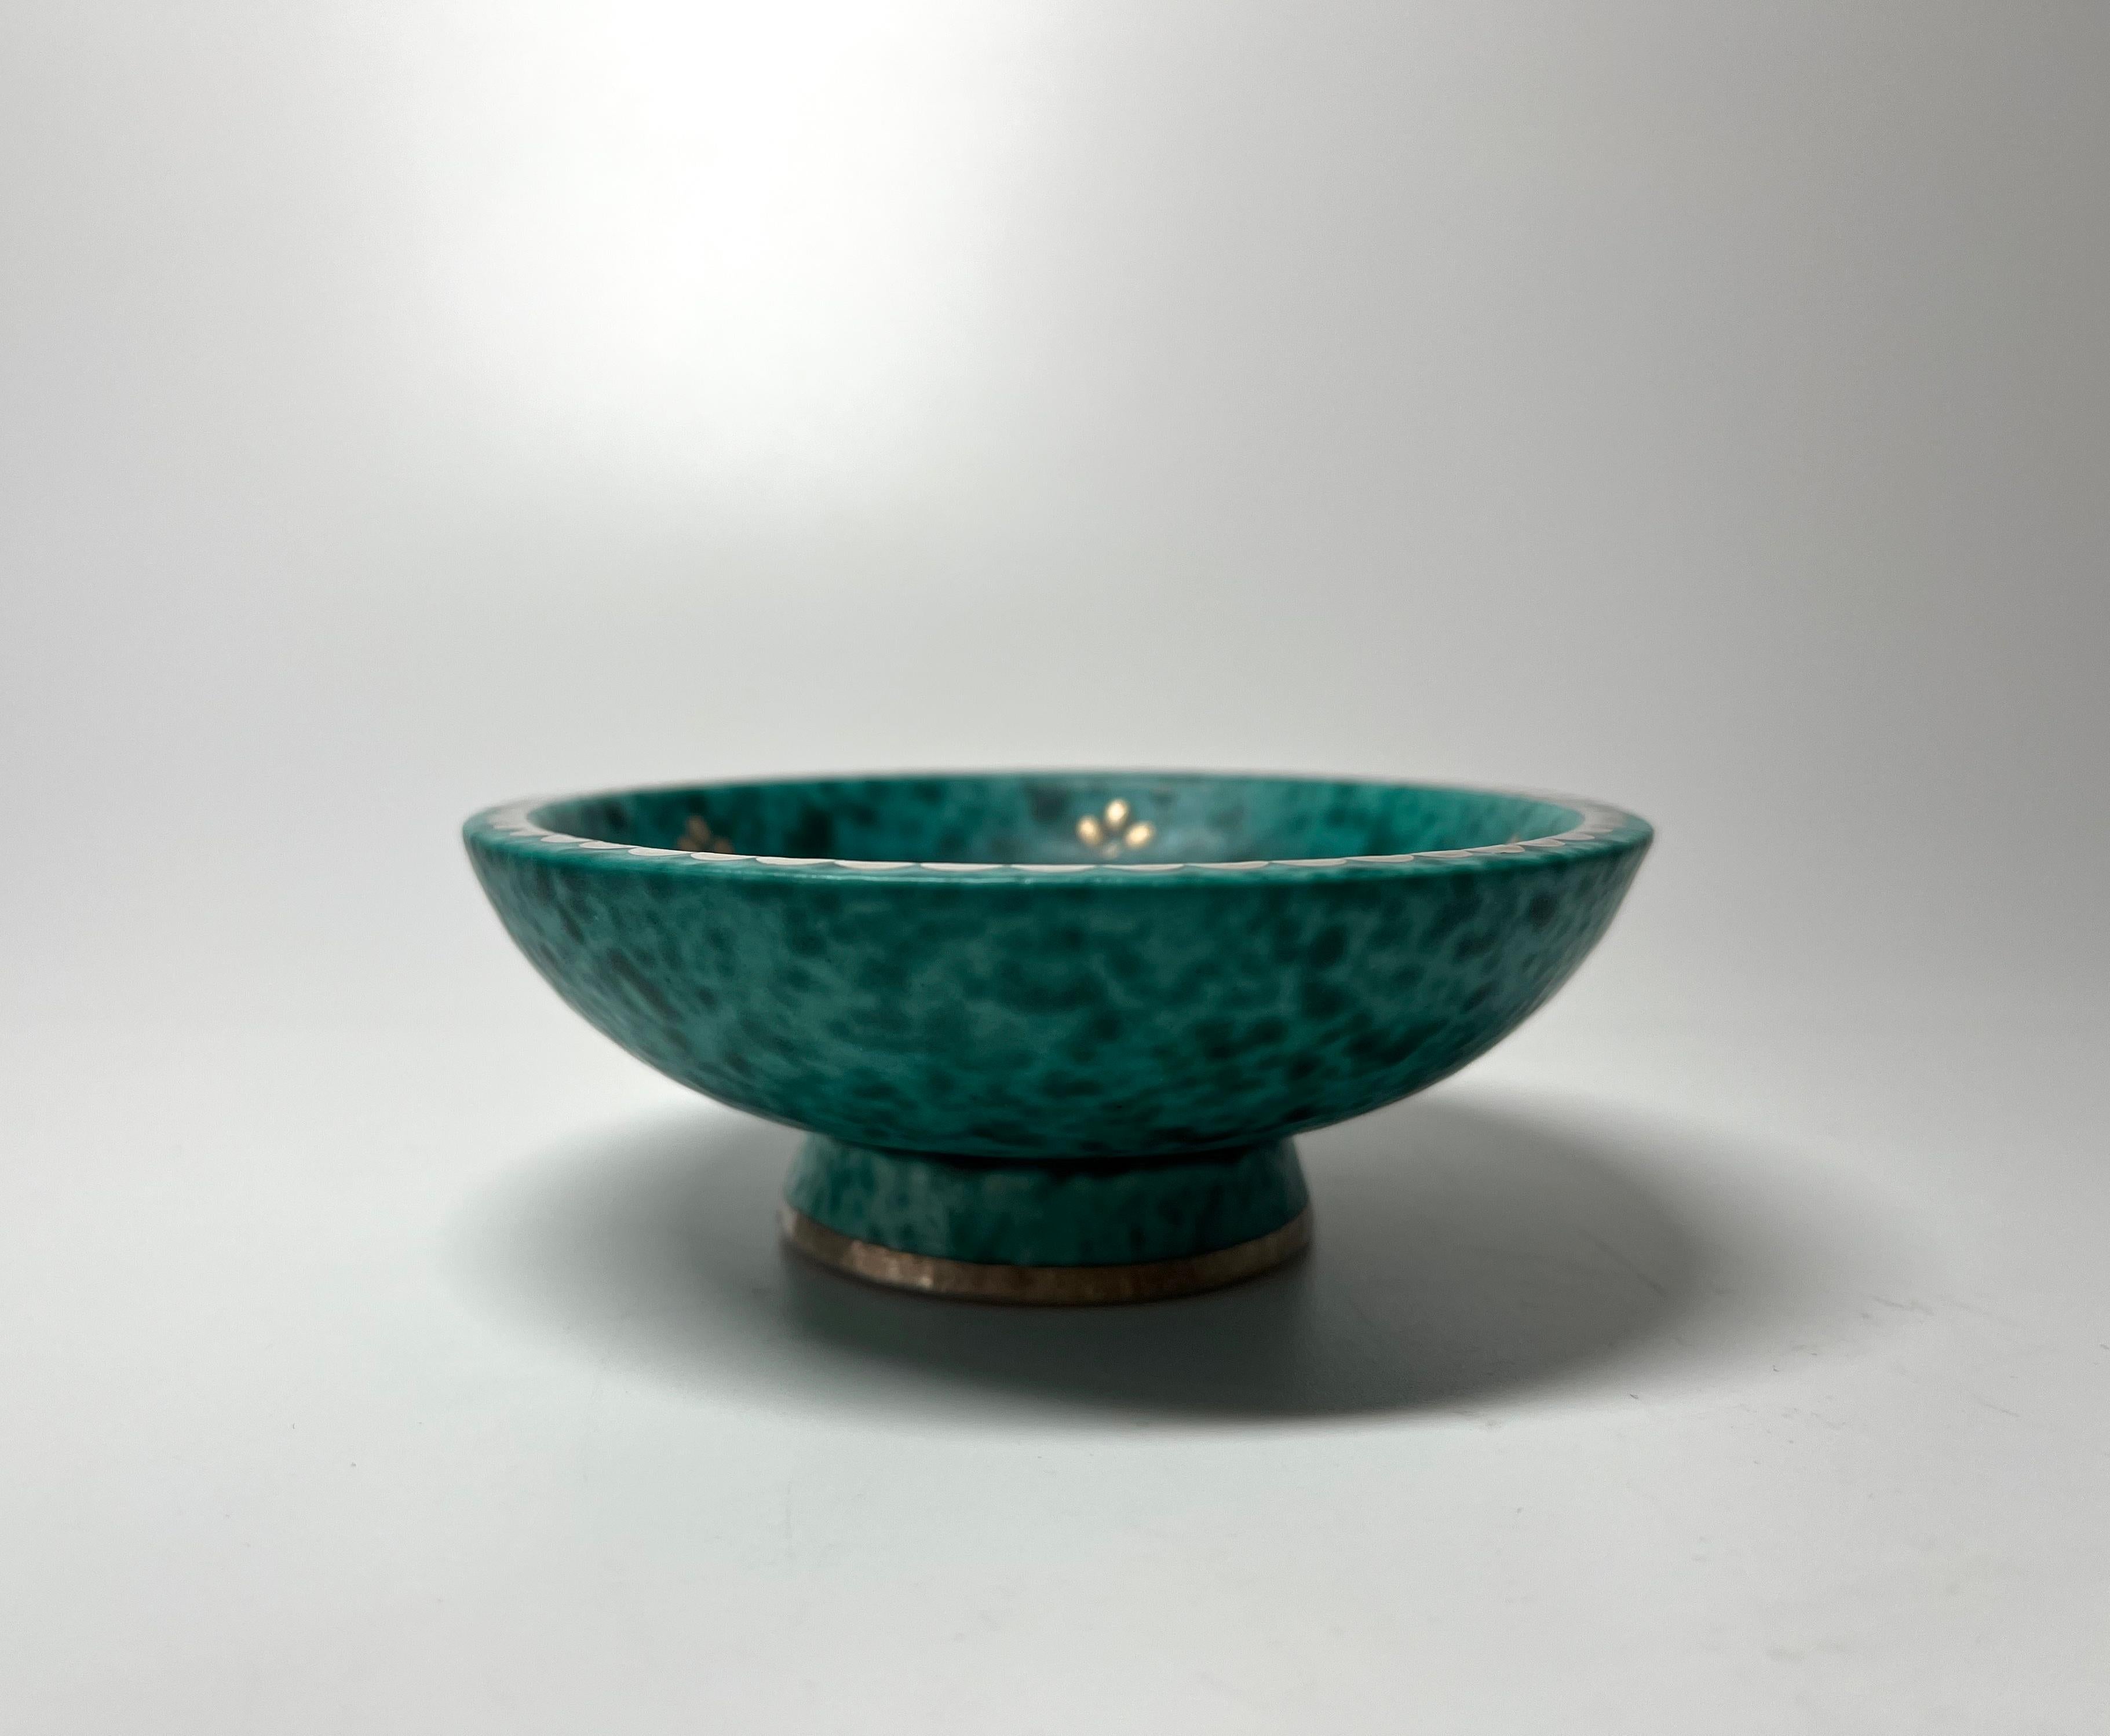 Glazed Magnificently Mottled Wilhelm Kage, Small Footed Argenta Stoneware Dish